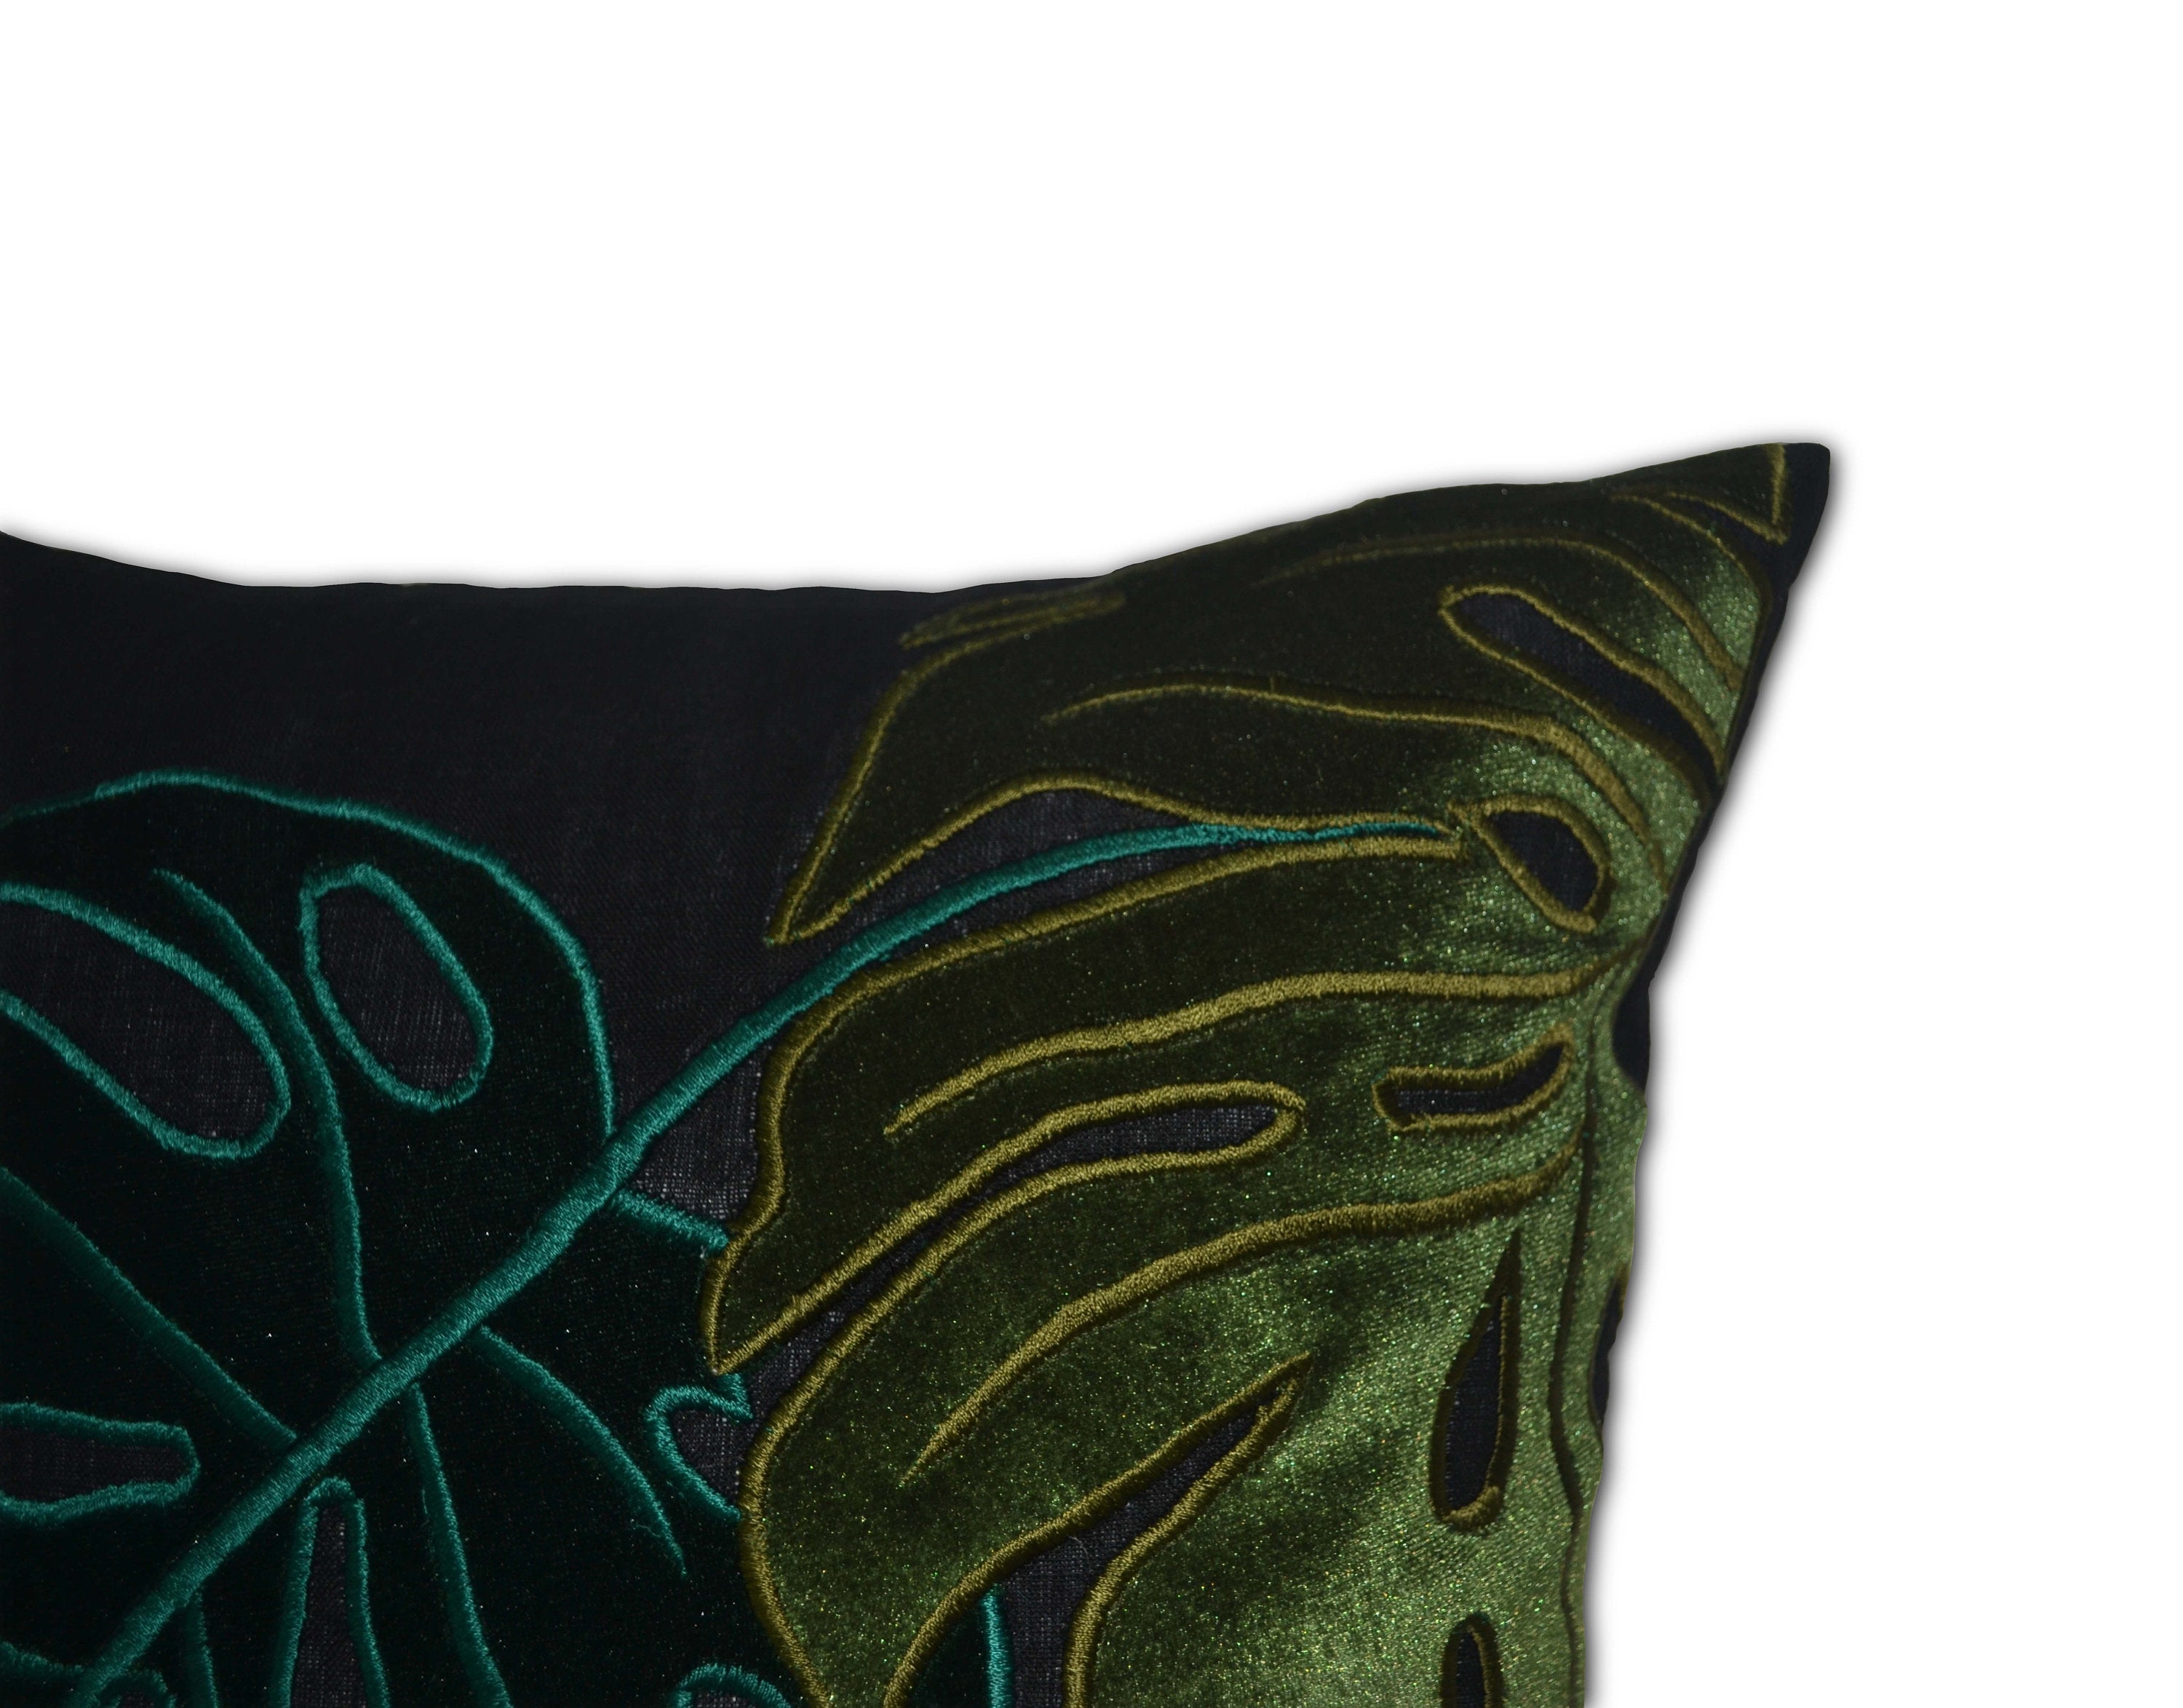 Amore Beaute pillow is great even as a standalone accent piece or can be used to creatively tie in other décor pieces particularly abstract art objects.